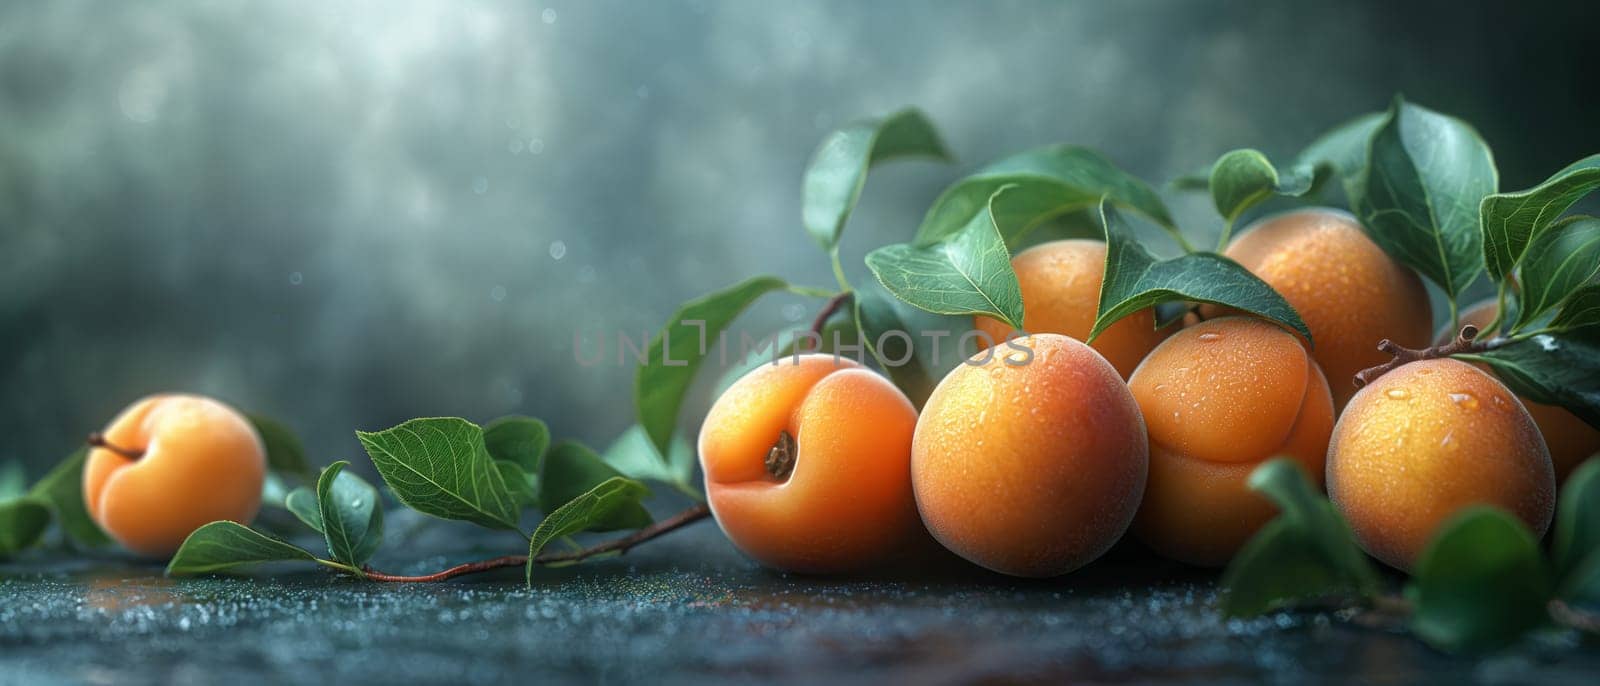 Ripe apricots on the table on a green background. by Fischeron